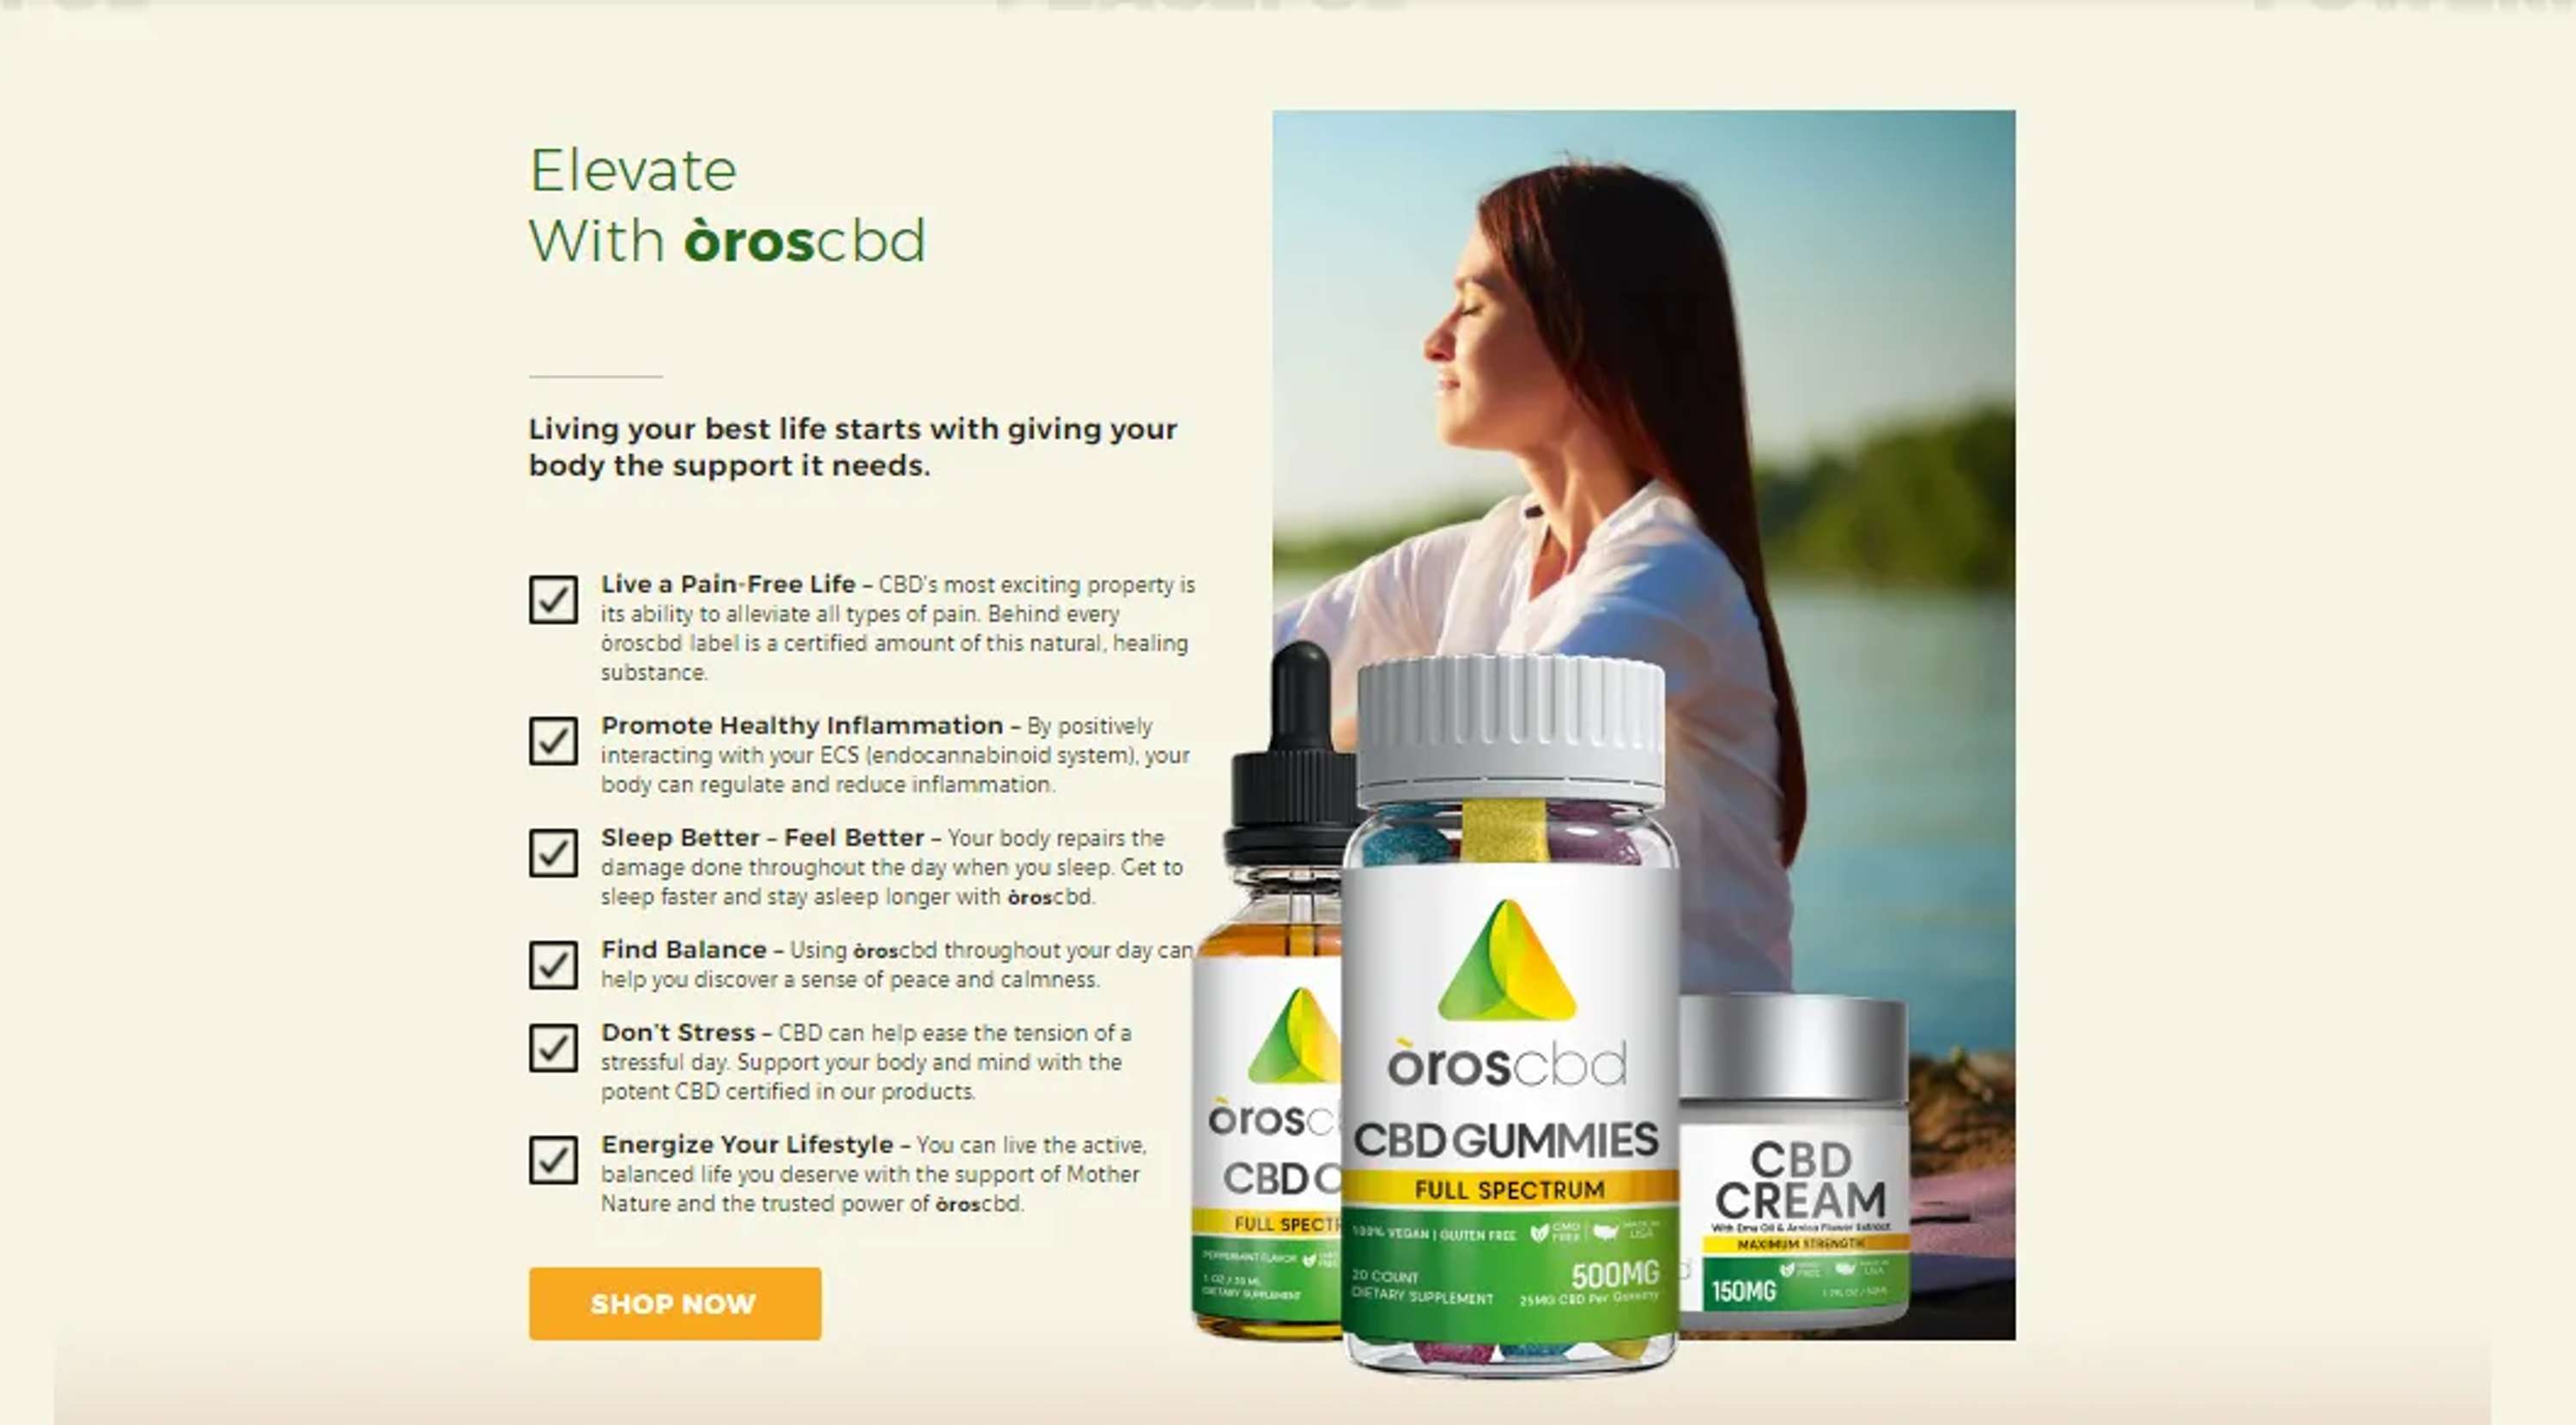 Oros CBD Gummies Review 2022 - Does It Really Work?